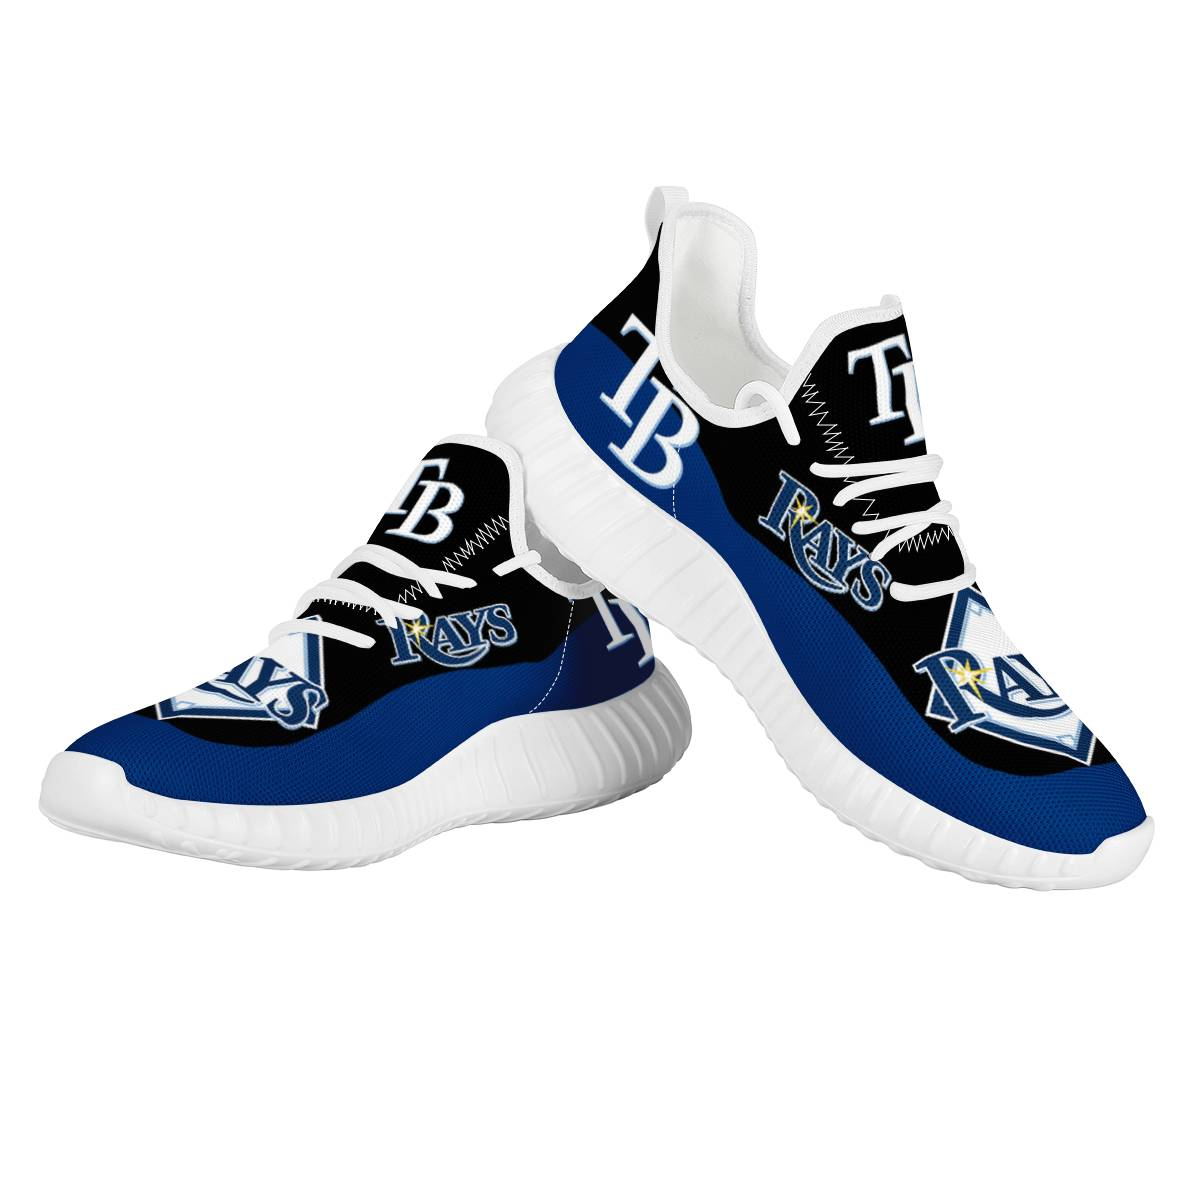 Men's MLB Tampa Bay Rays Mesh Knit Sneakers/Shoes 002